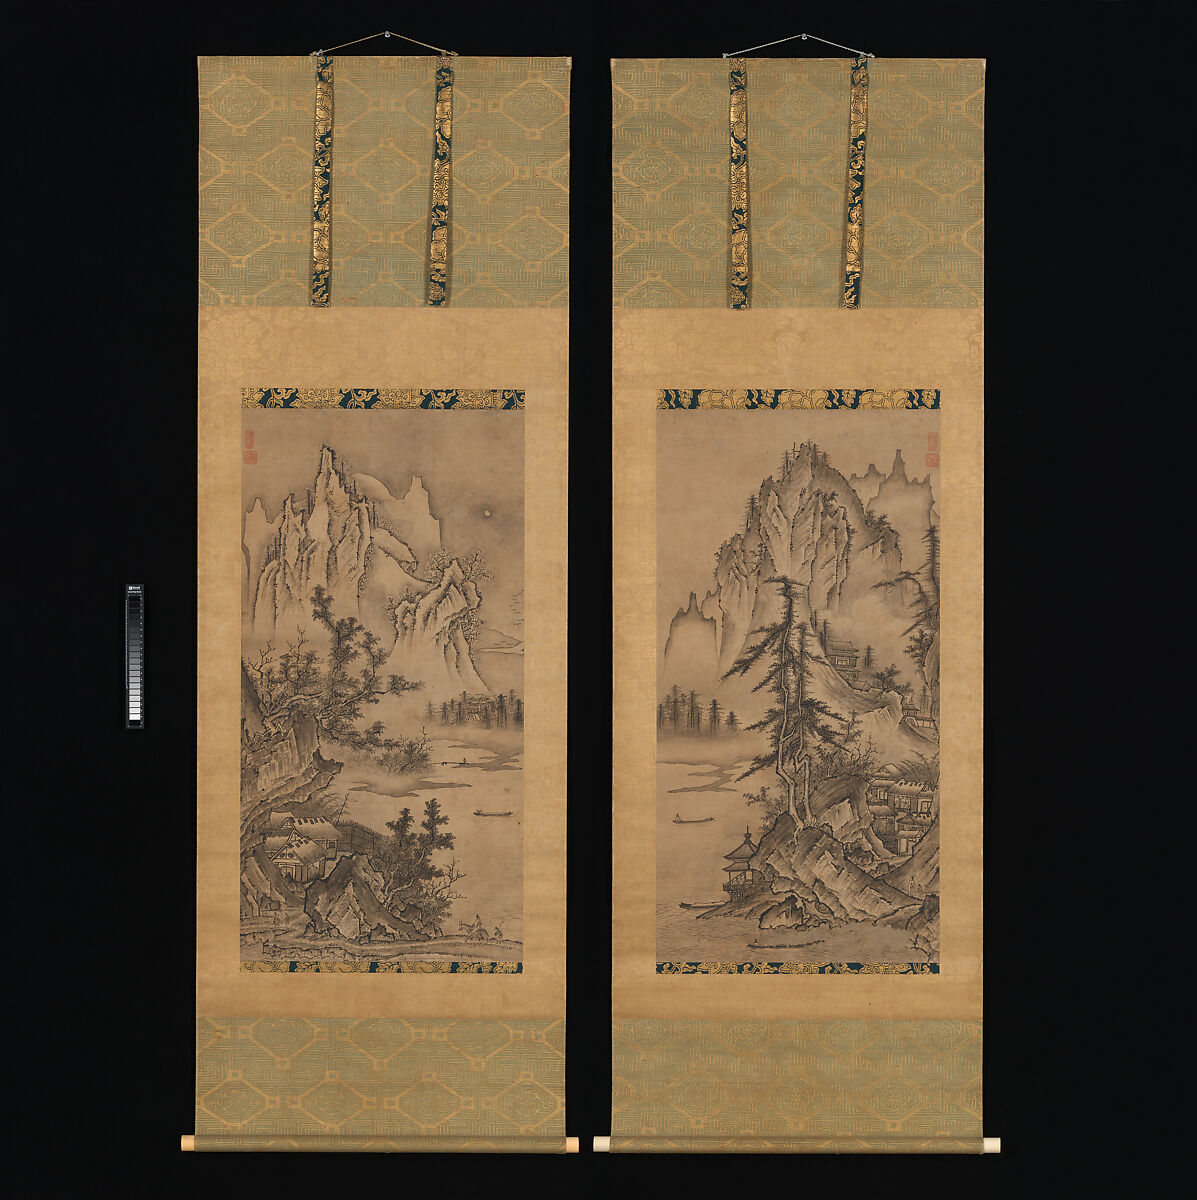 Landscapes of the Four Seasons, Keison (Japanese, active mid-16th century), Pair of hanging scrolls; ink on paper, Japan 